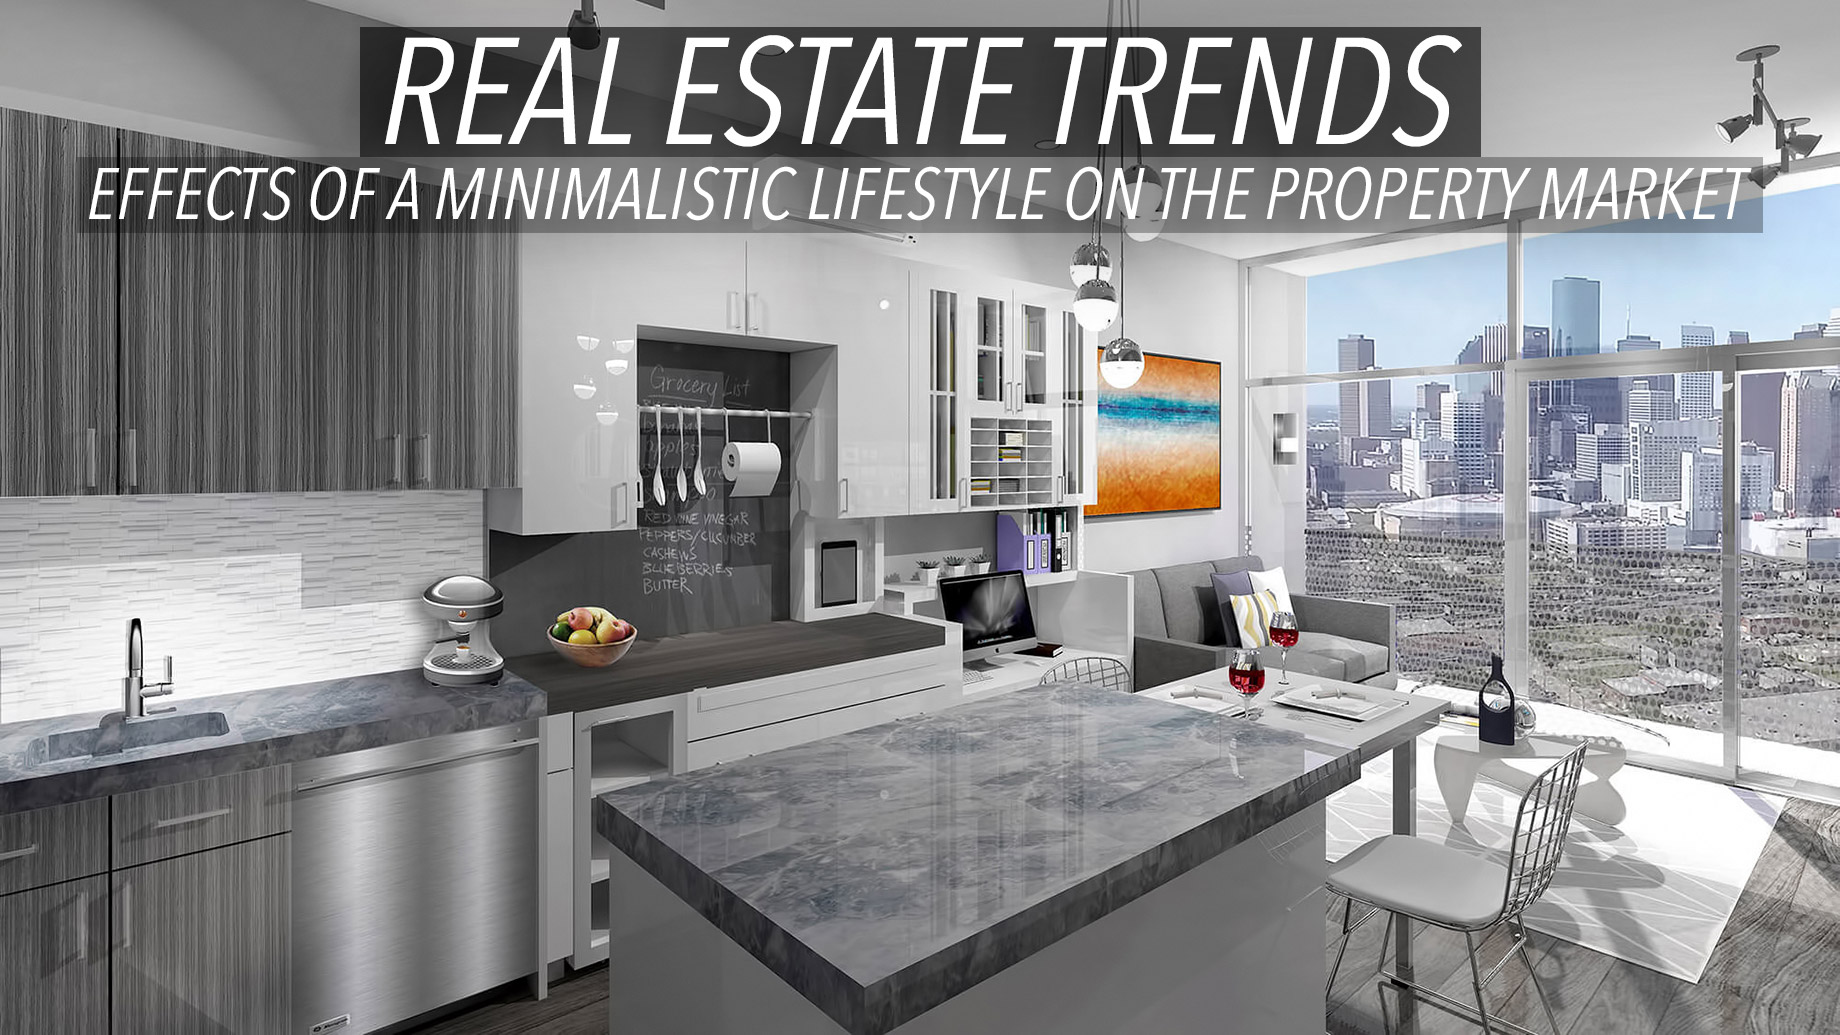 Real Estate Trends - Effects of a Minimalistic Lifestyle on the Property Market